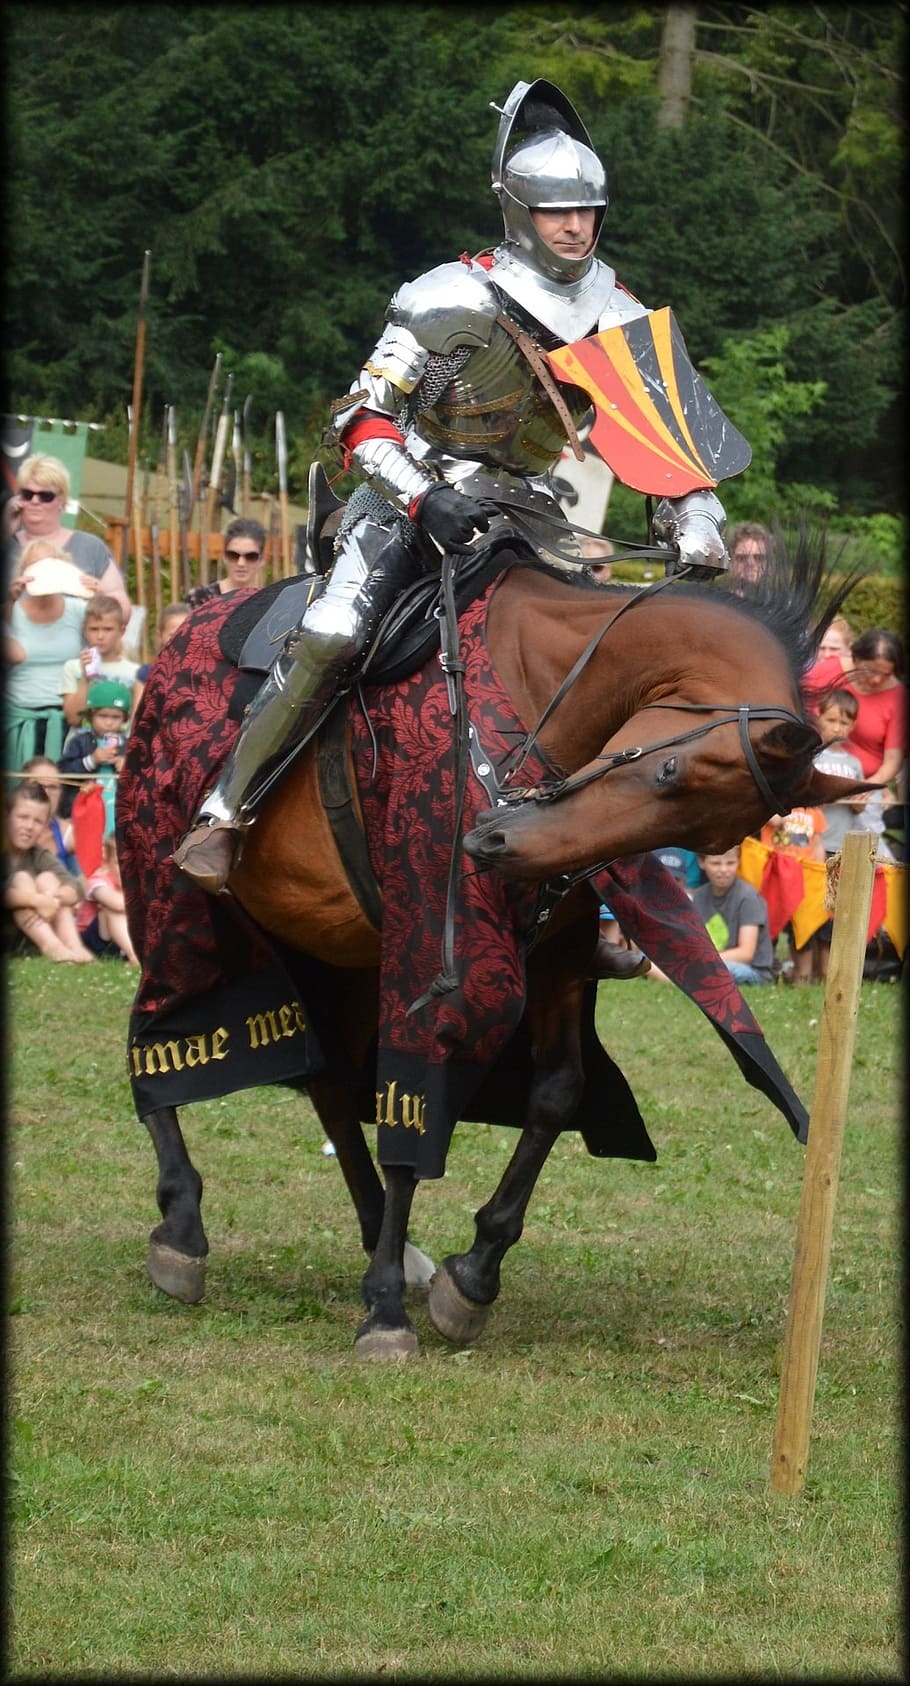 spectacular knight, knights, horses, lances, jousting tournament, medieval, fight, amsterdam, holland, real people